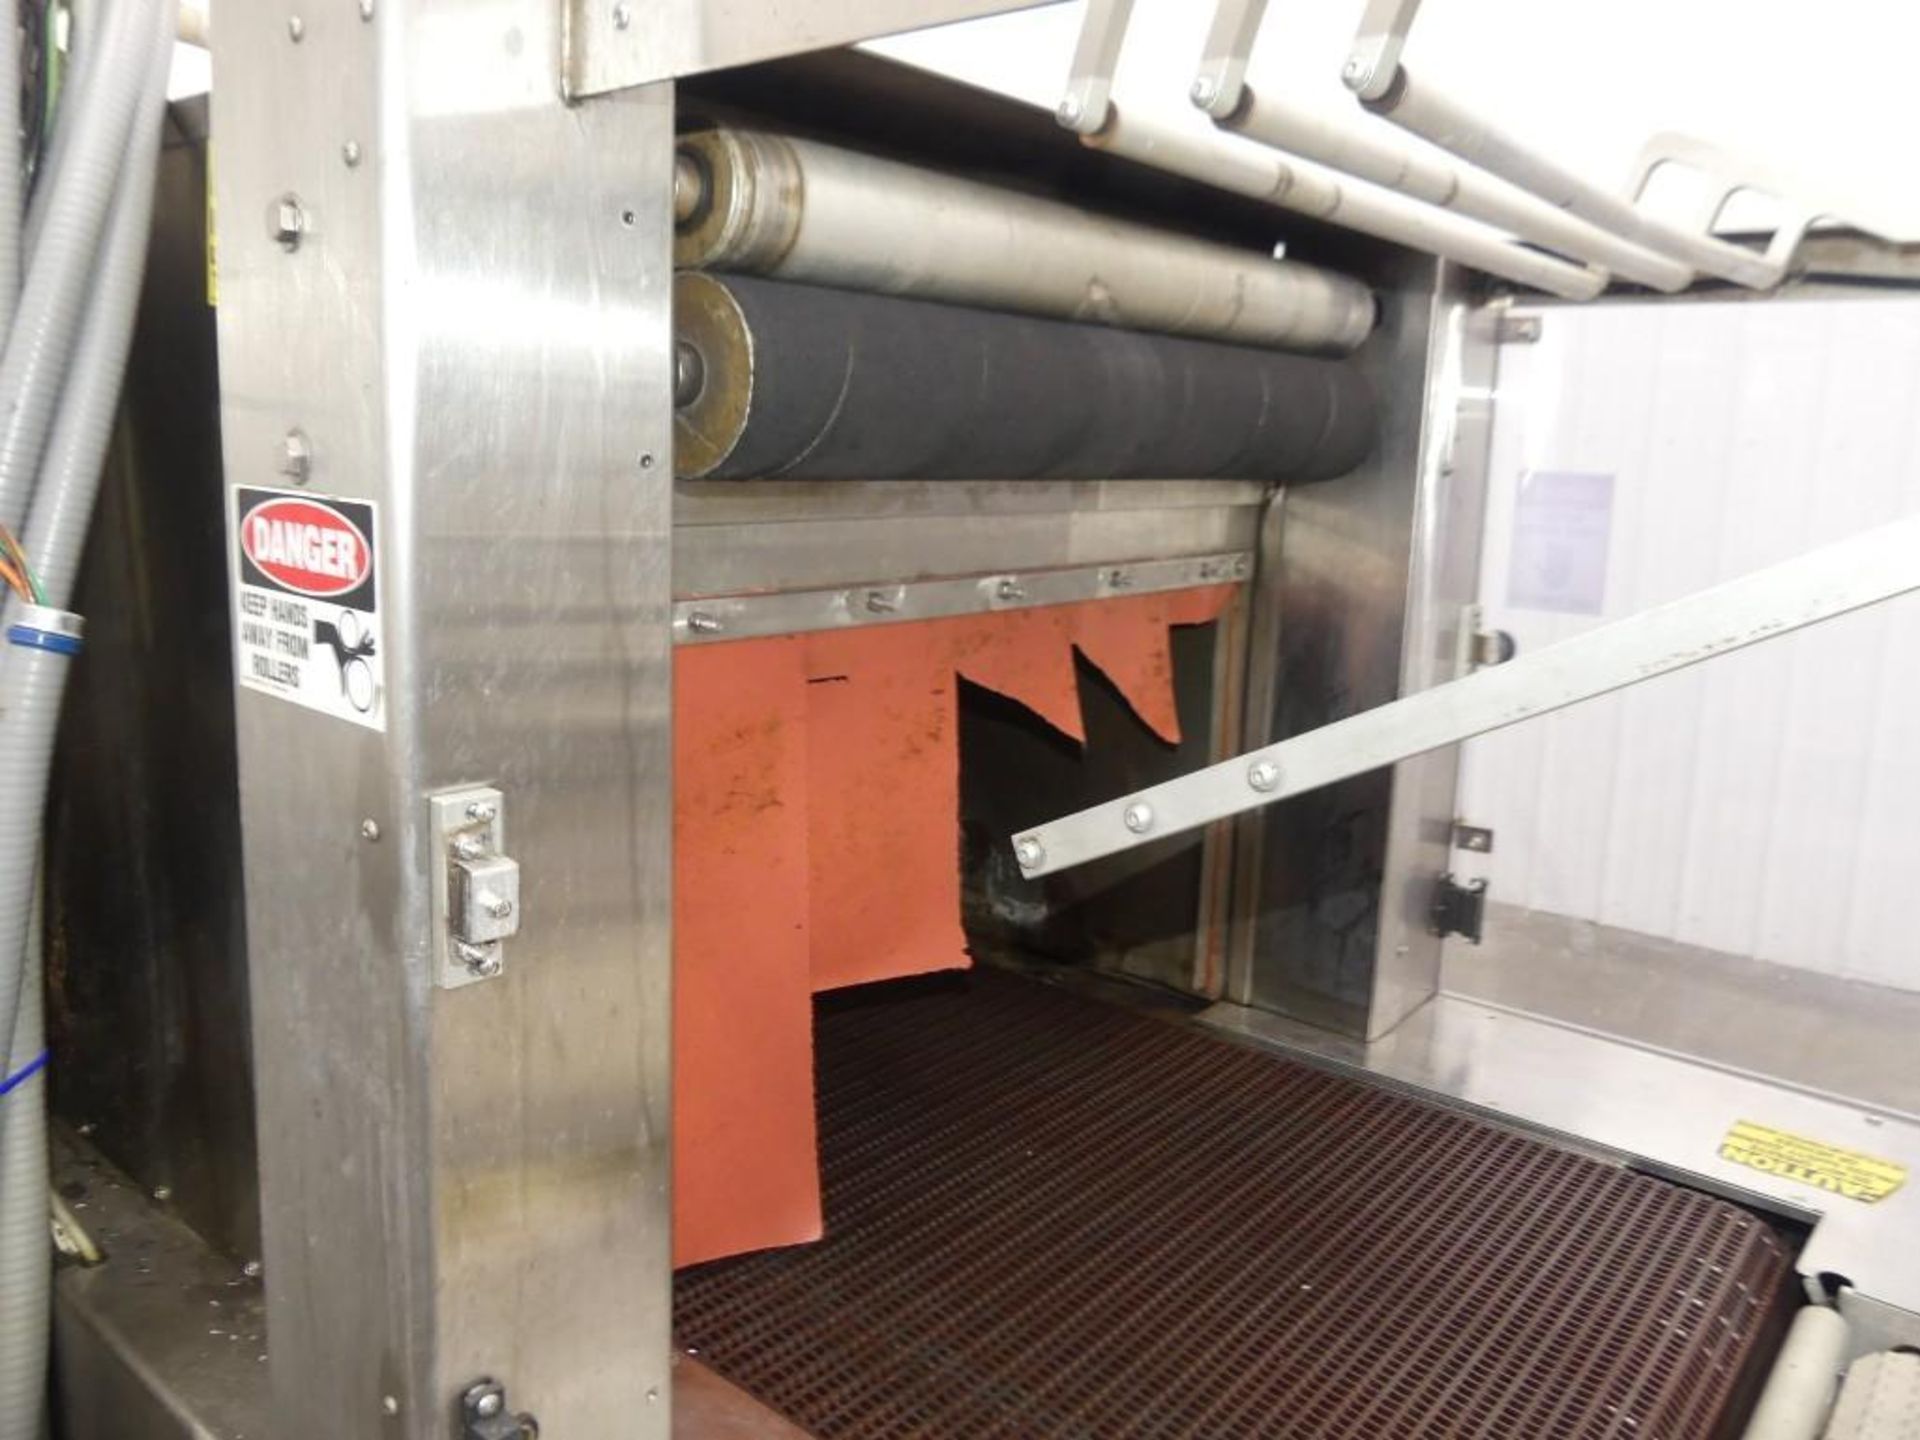 Delcor Spot-Pak 112-SS-24 Automatic Stainless Steel Shrink Bundler with Pick and Place - Image 41 of 78